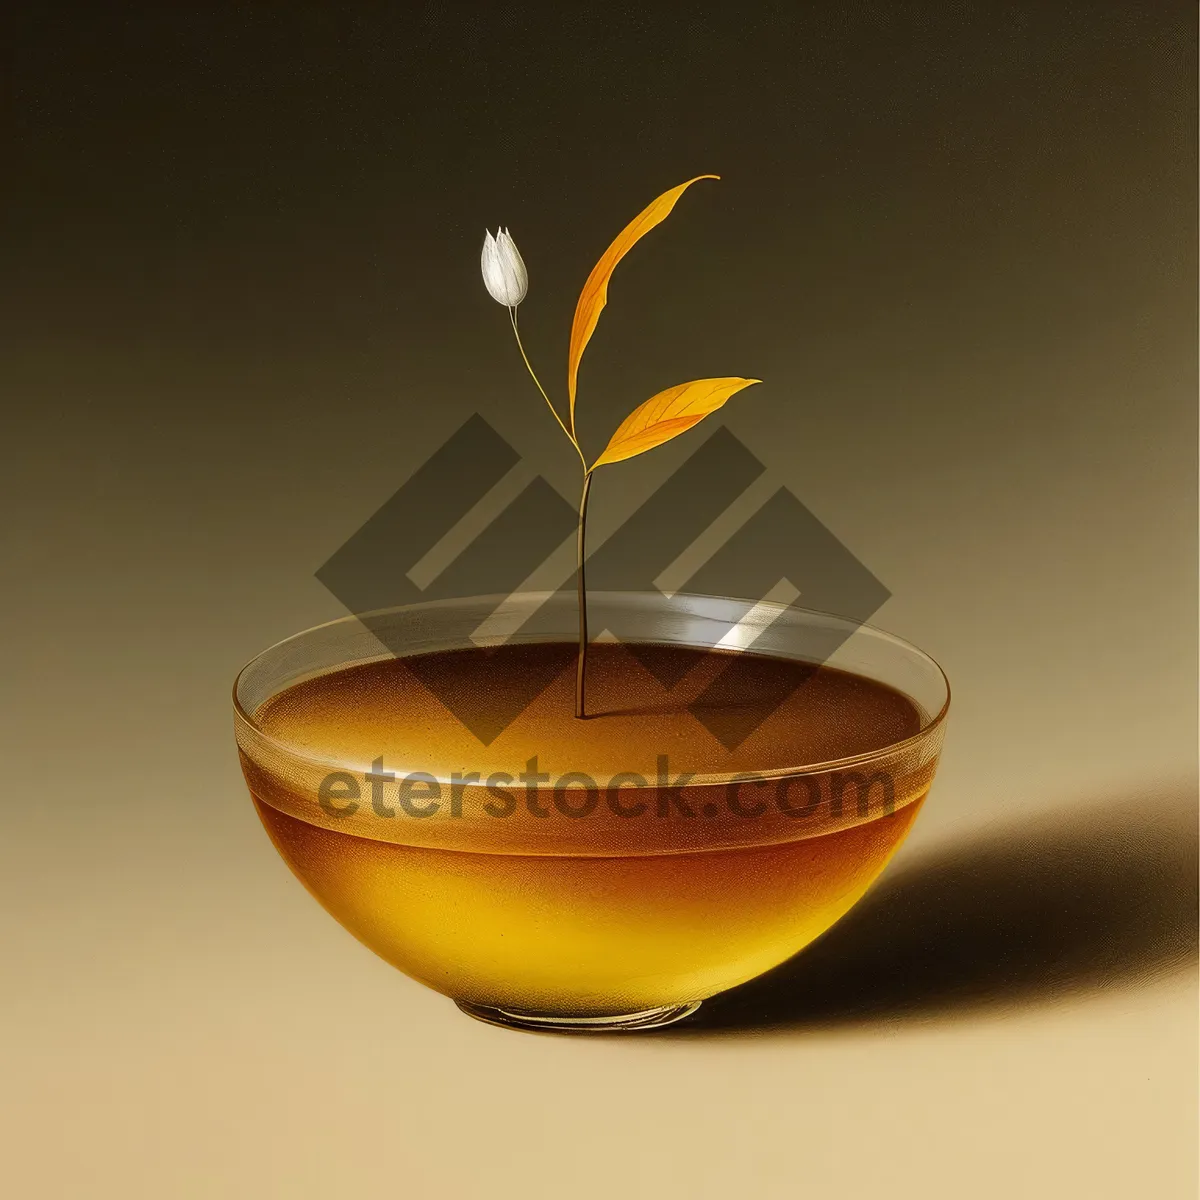 Picture of Yellow Wineglass with Honey and Mixed Drinks